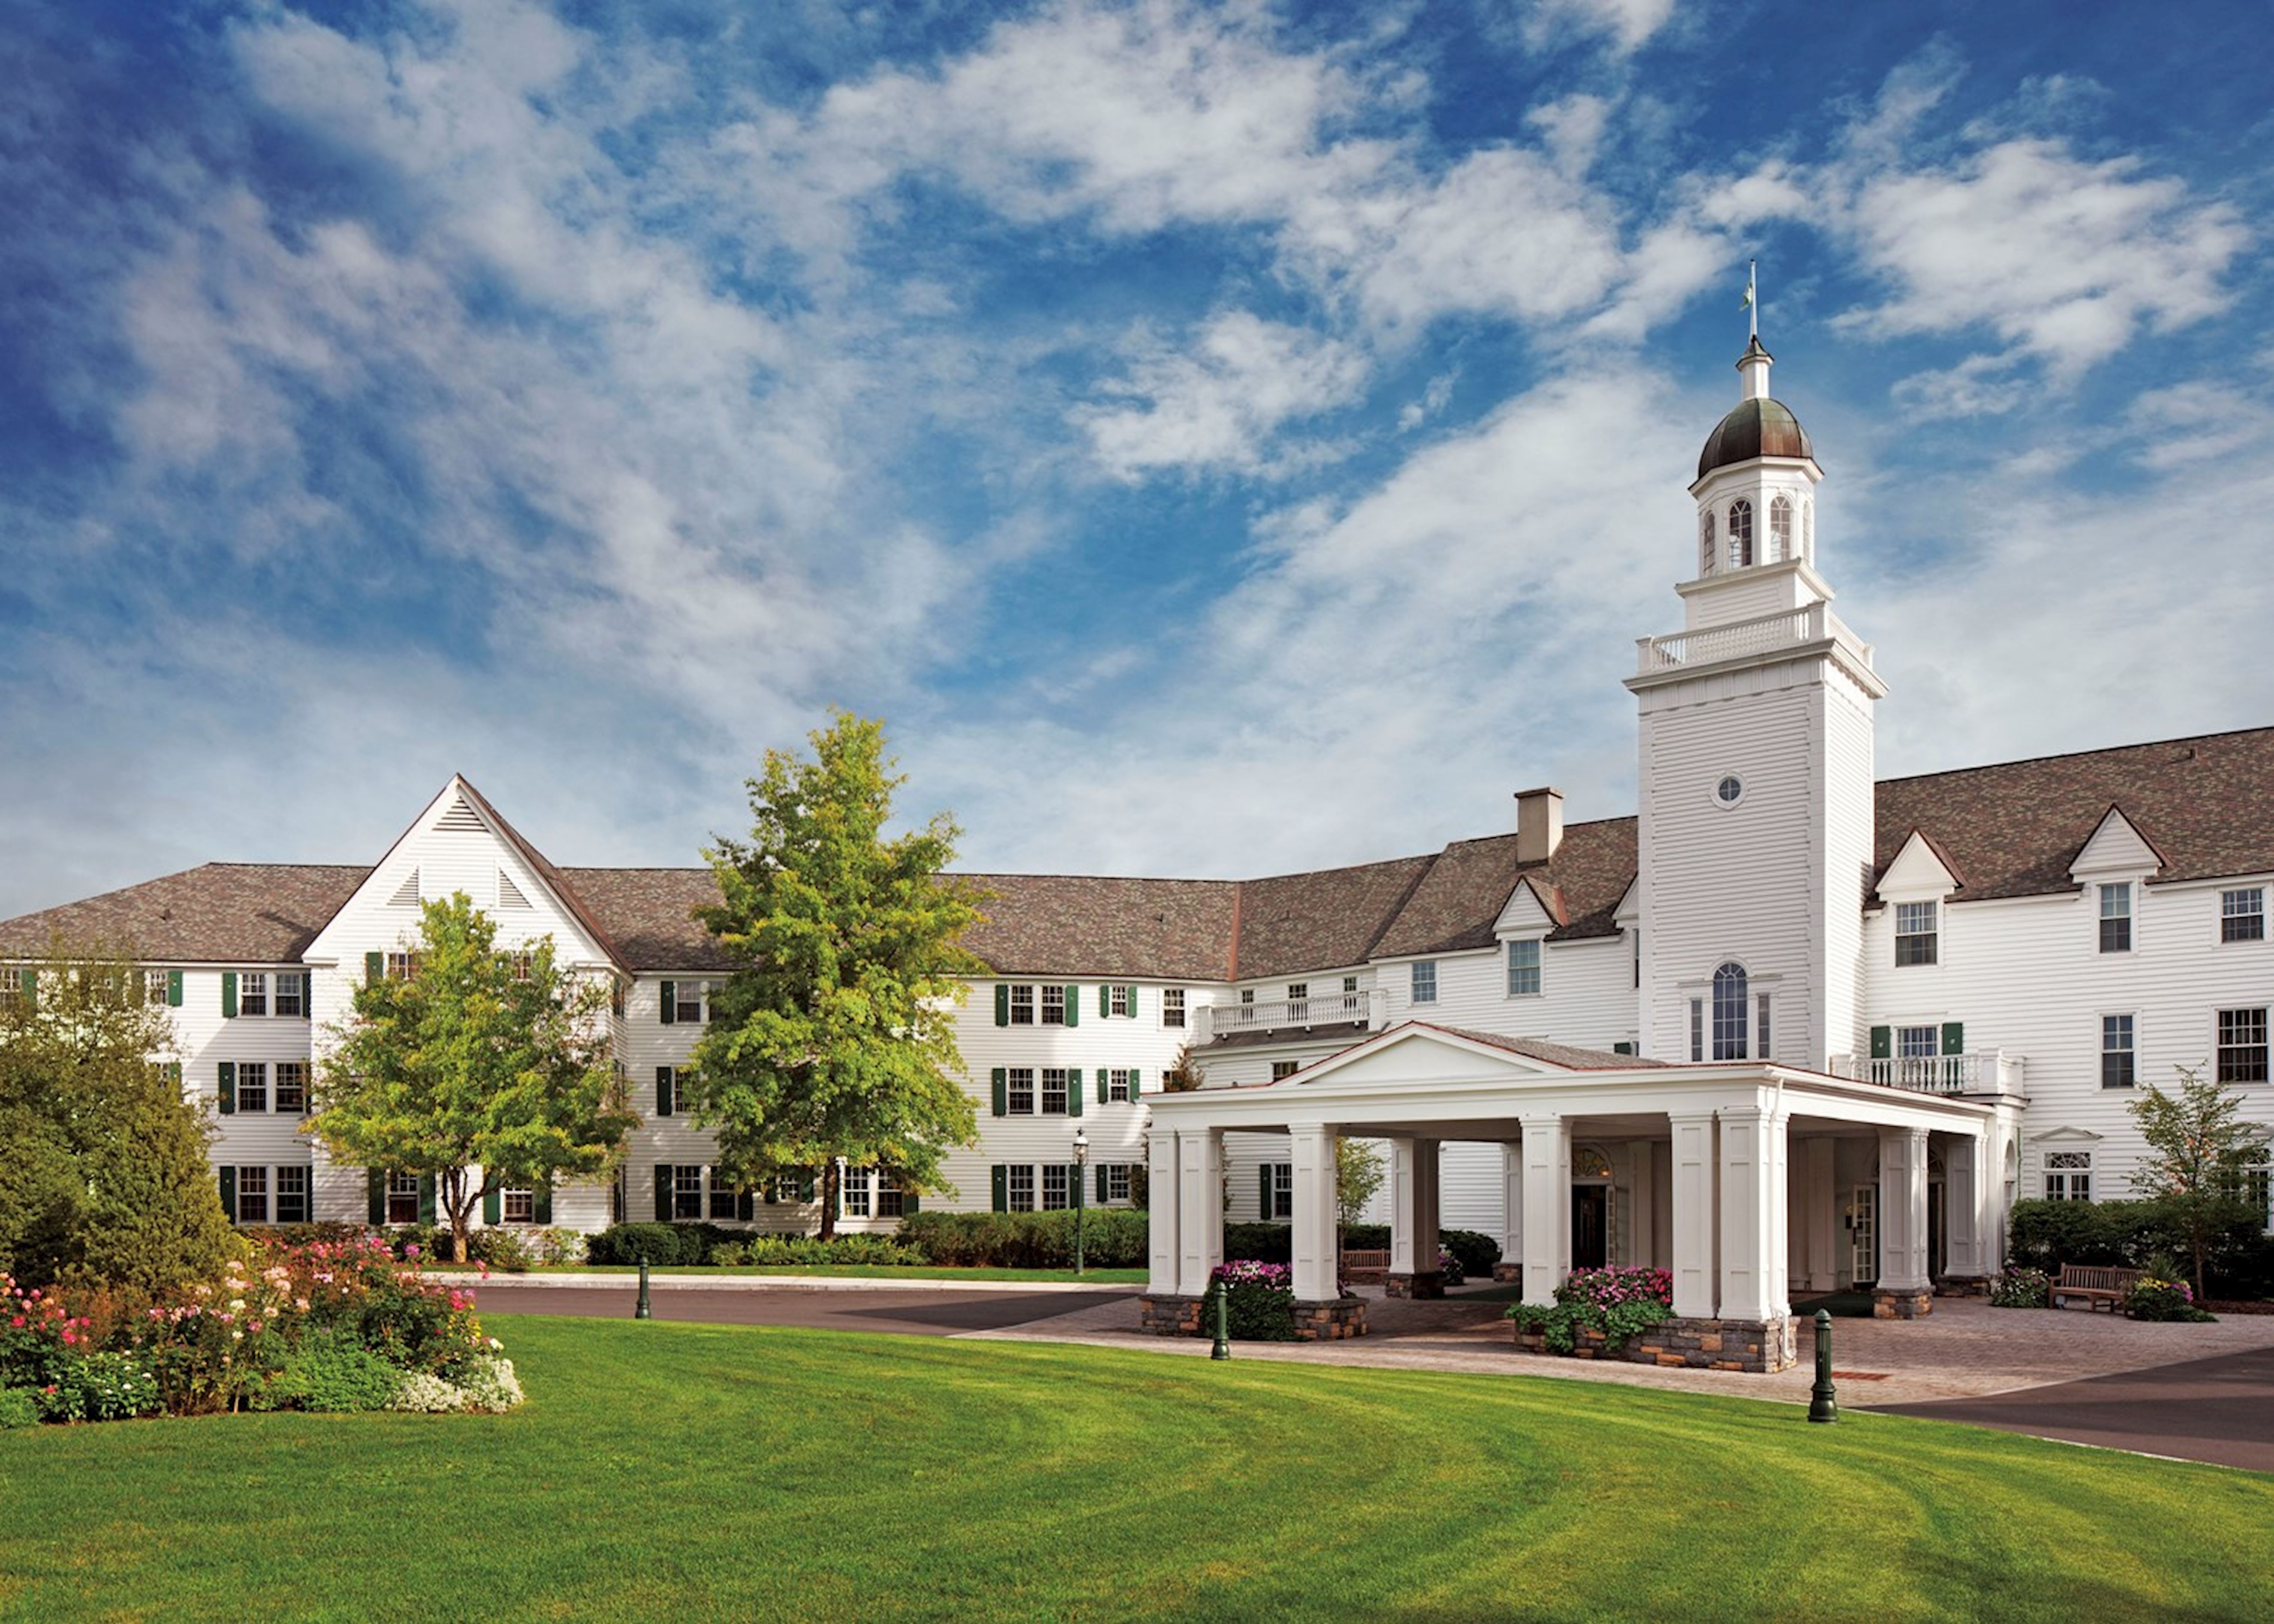 Winter Vacations at The Sagamore Resort with Kids